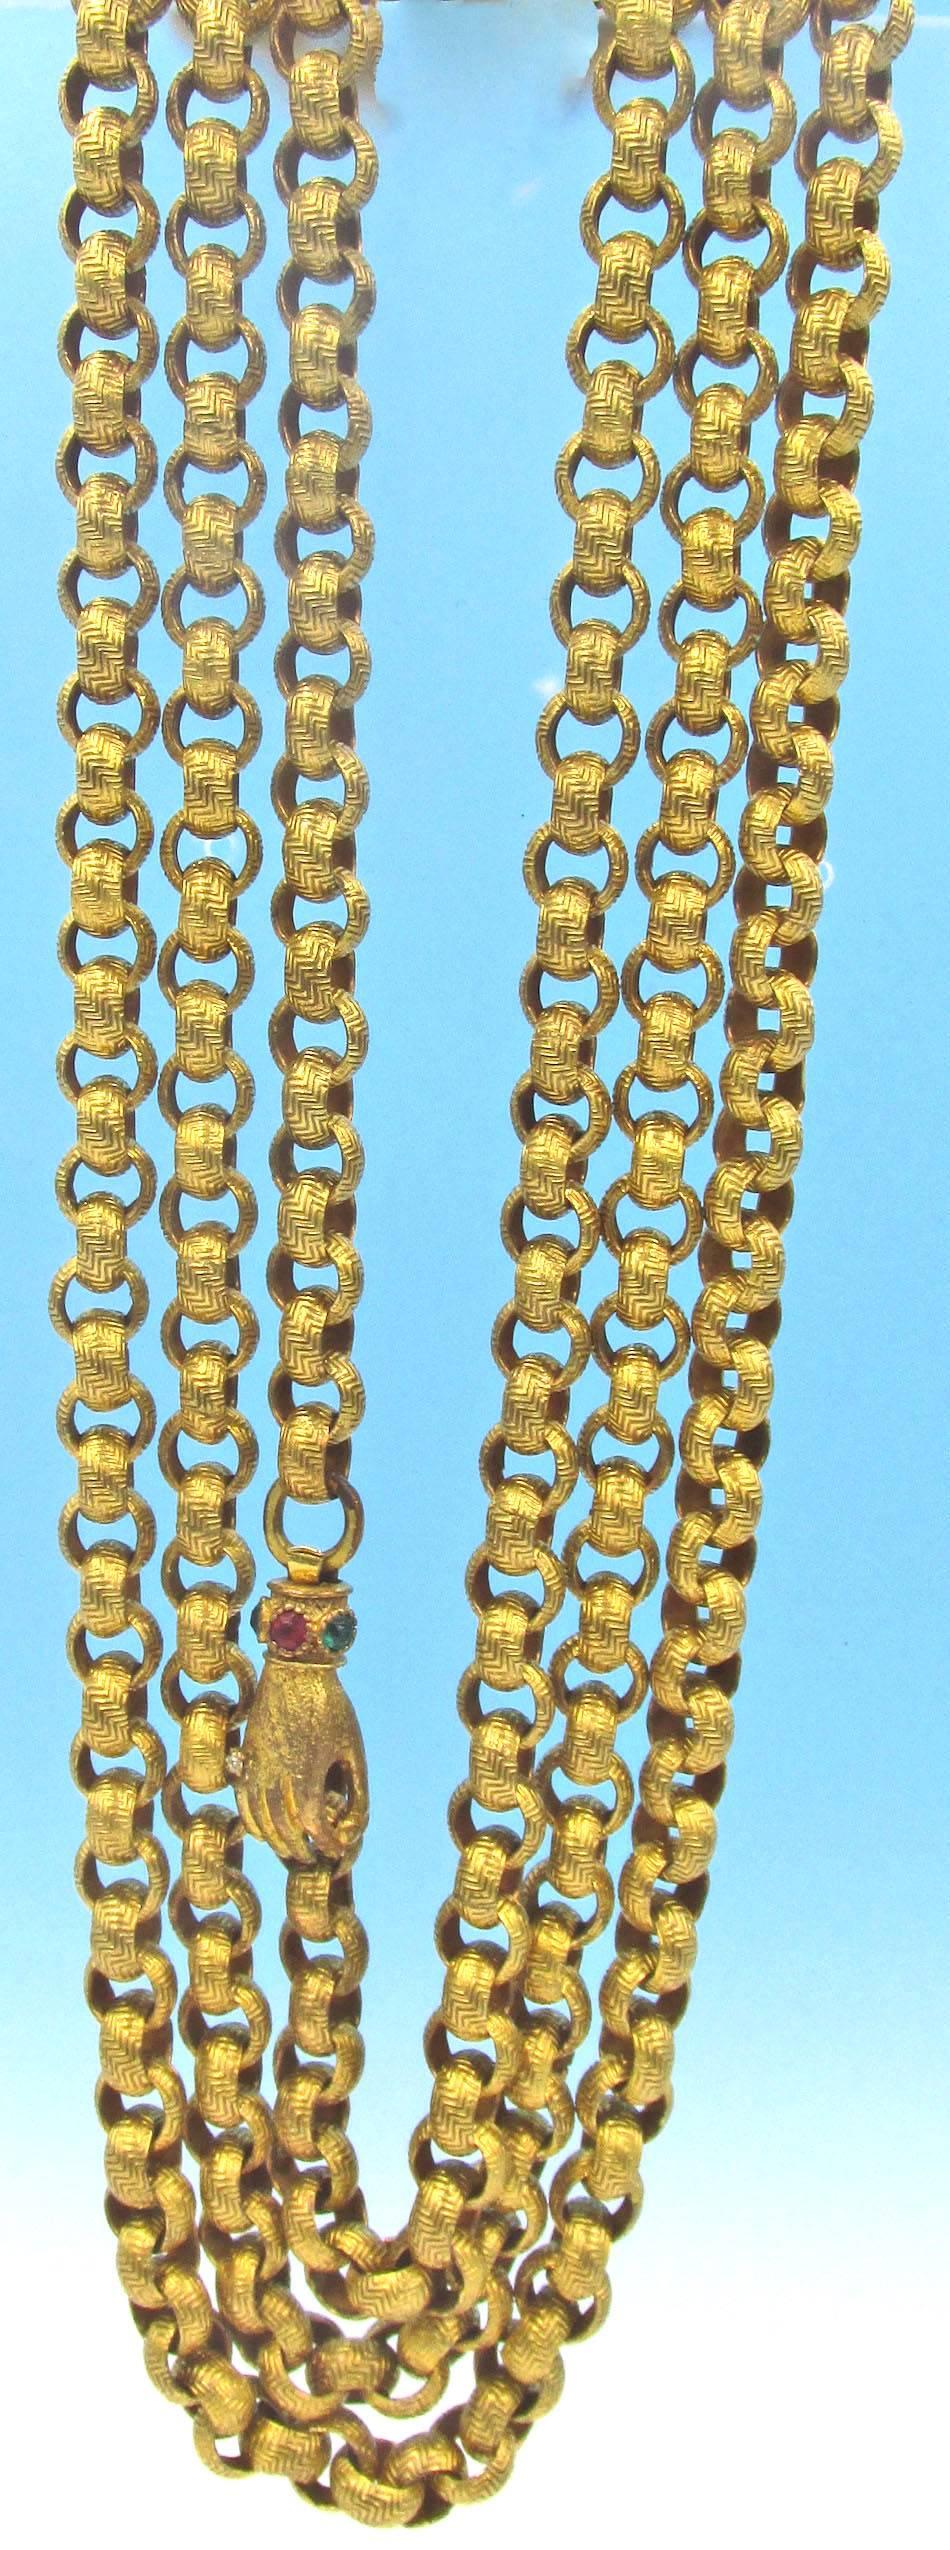 Women's Antique Pinchbeck Muff Chain with Hand Clasp, circa 1840